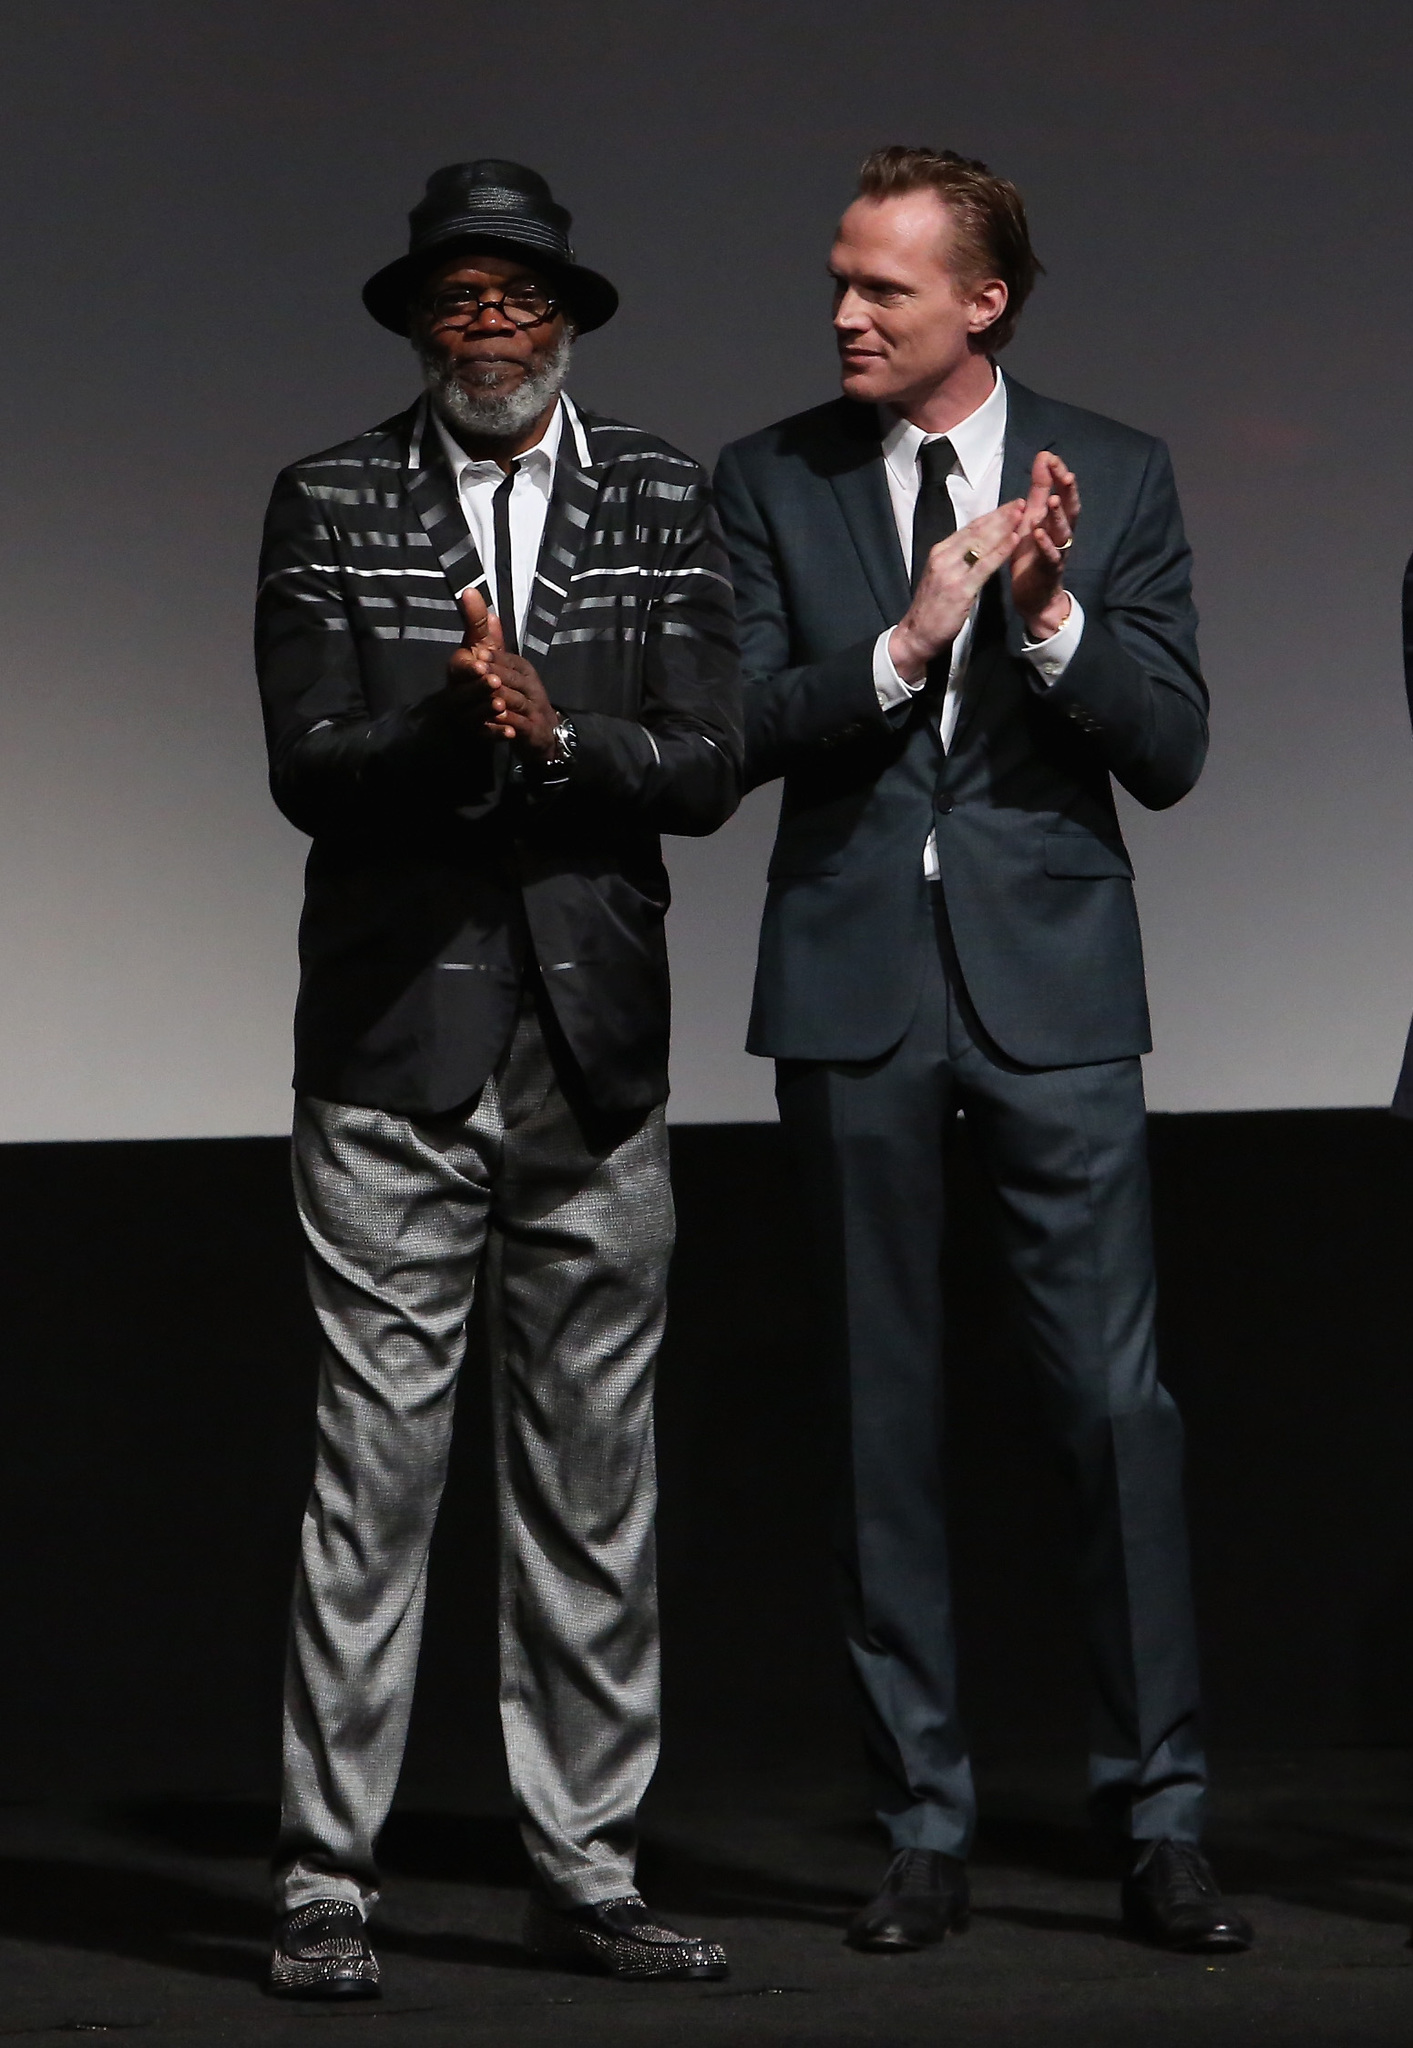 Samuel L. Jackson and Paul Bettany at event of Kersytojai 2 (2015)